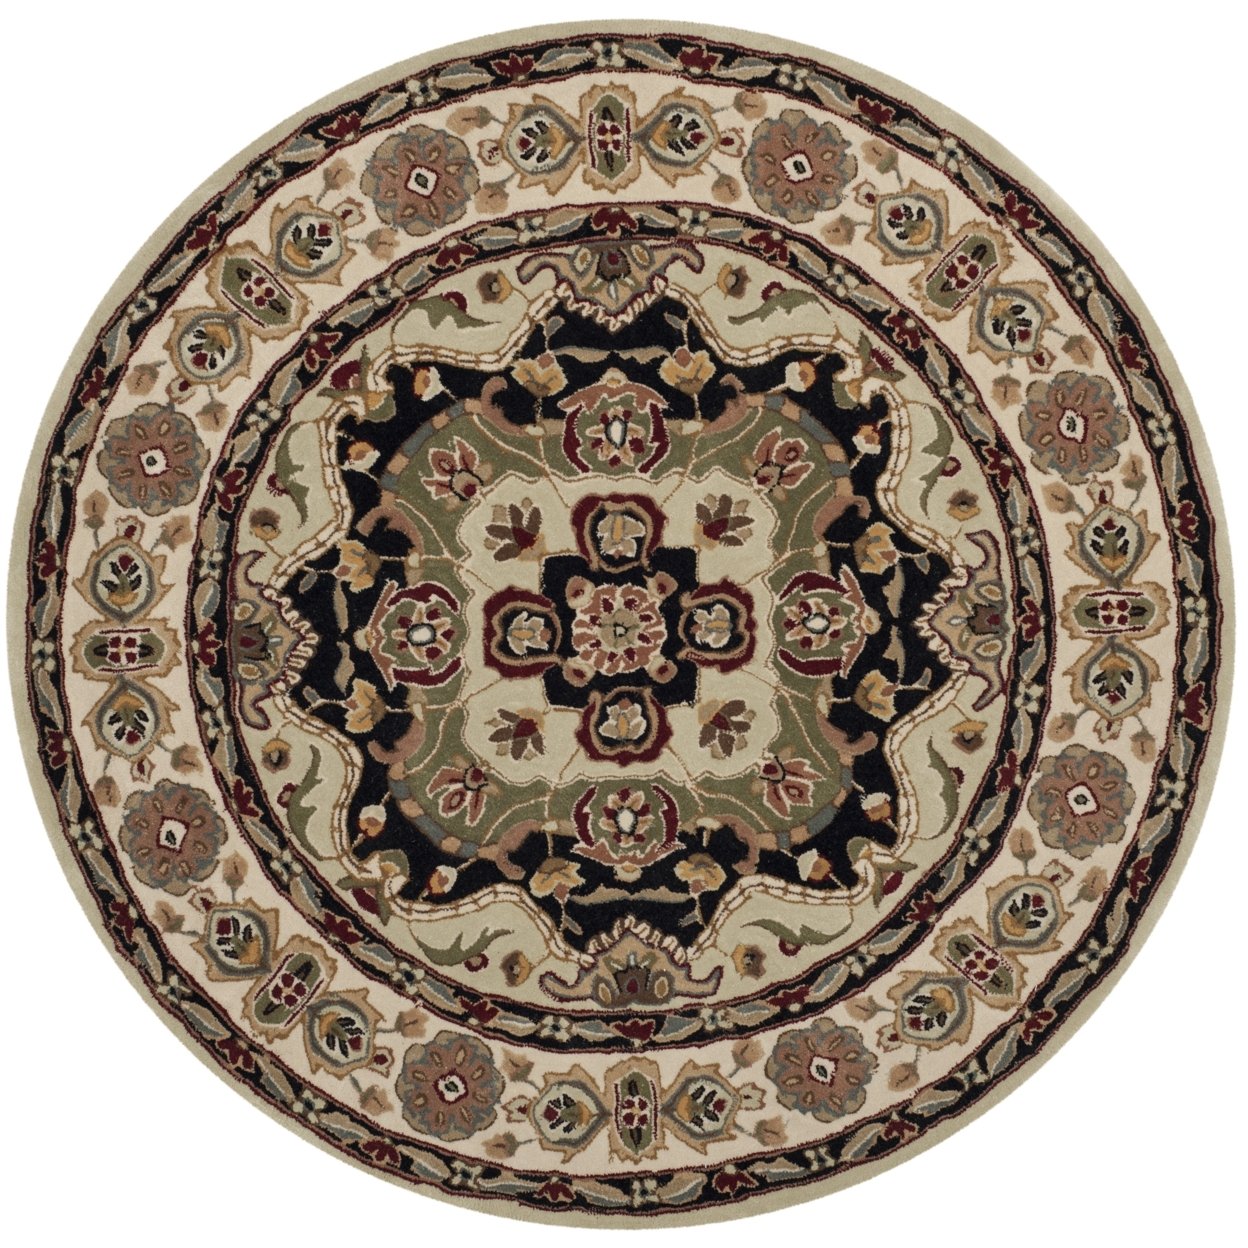 SAFAVIEH Total Performance TLP718A Soft Green / Ivory Rug - 8' Round